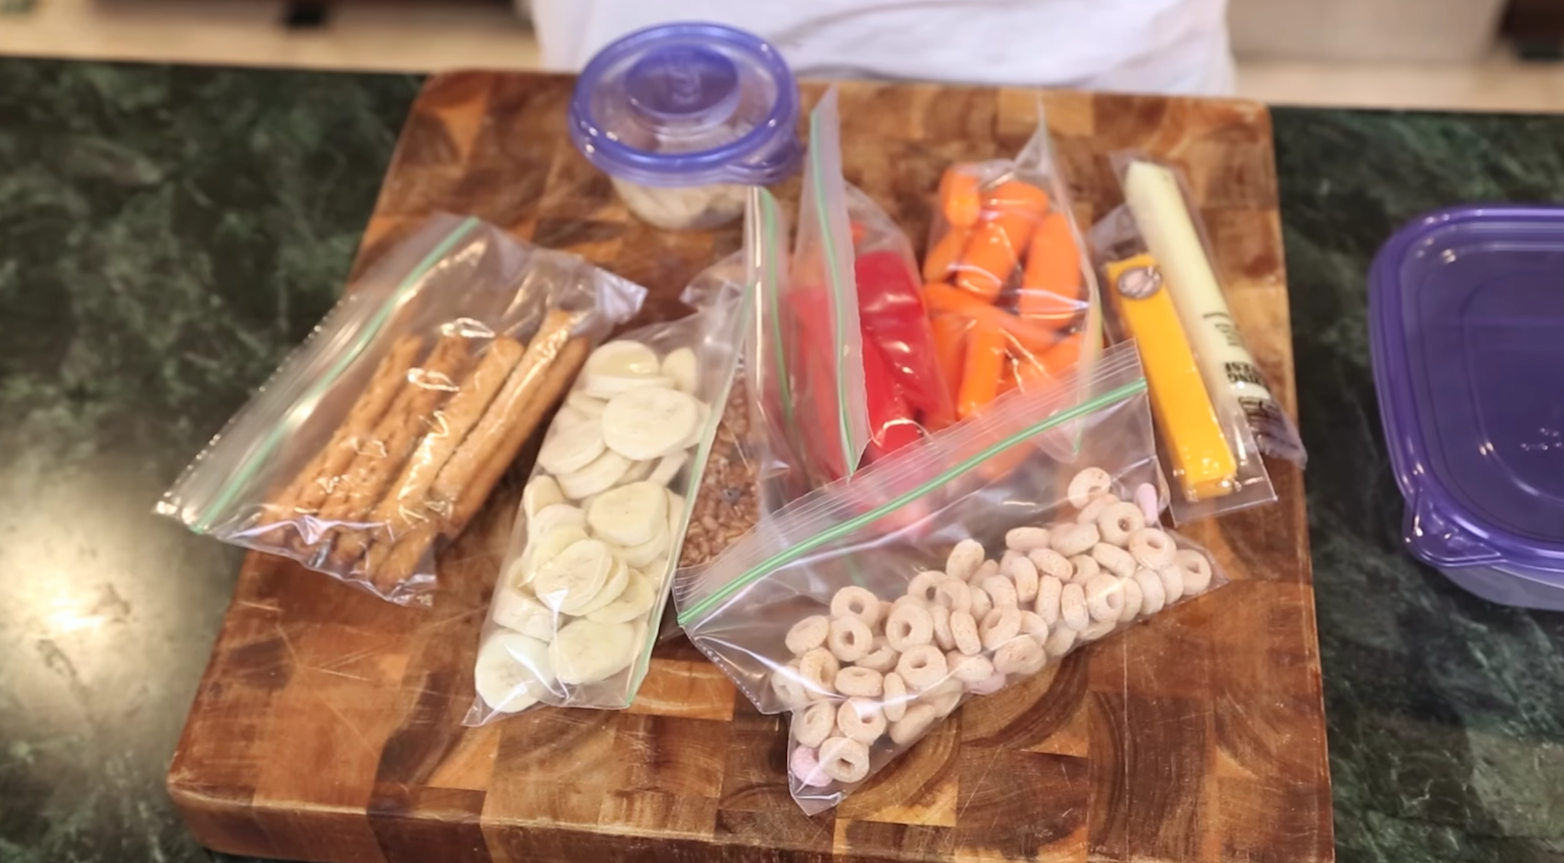 Going on an adventure with the family? Check out these travel food ideas in this great video! You’ll learn just what snacks to bring.